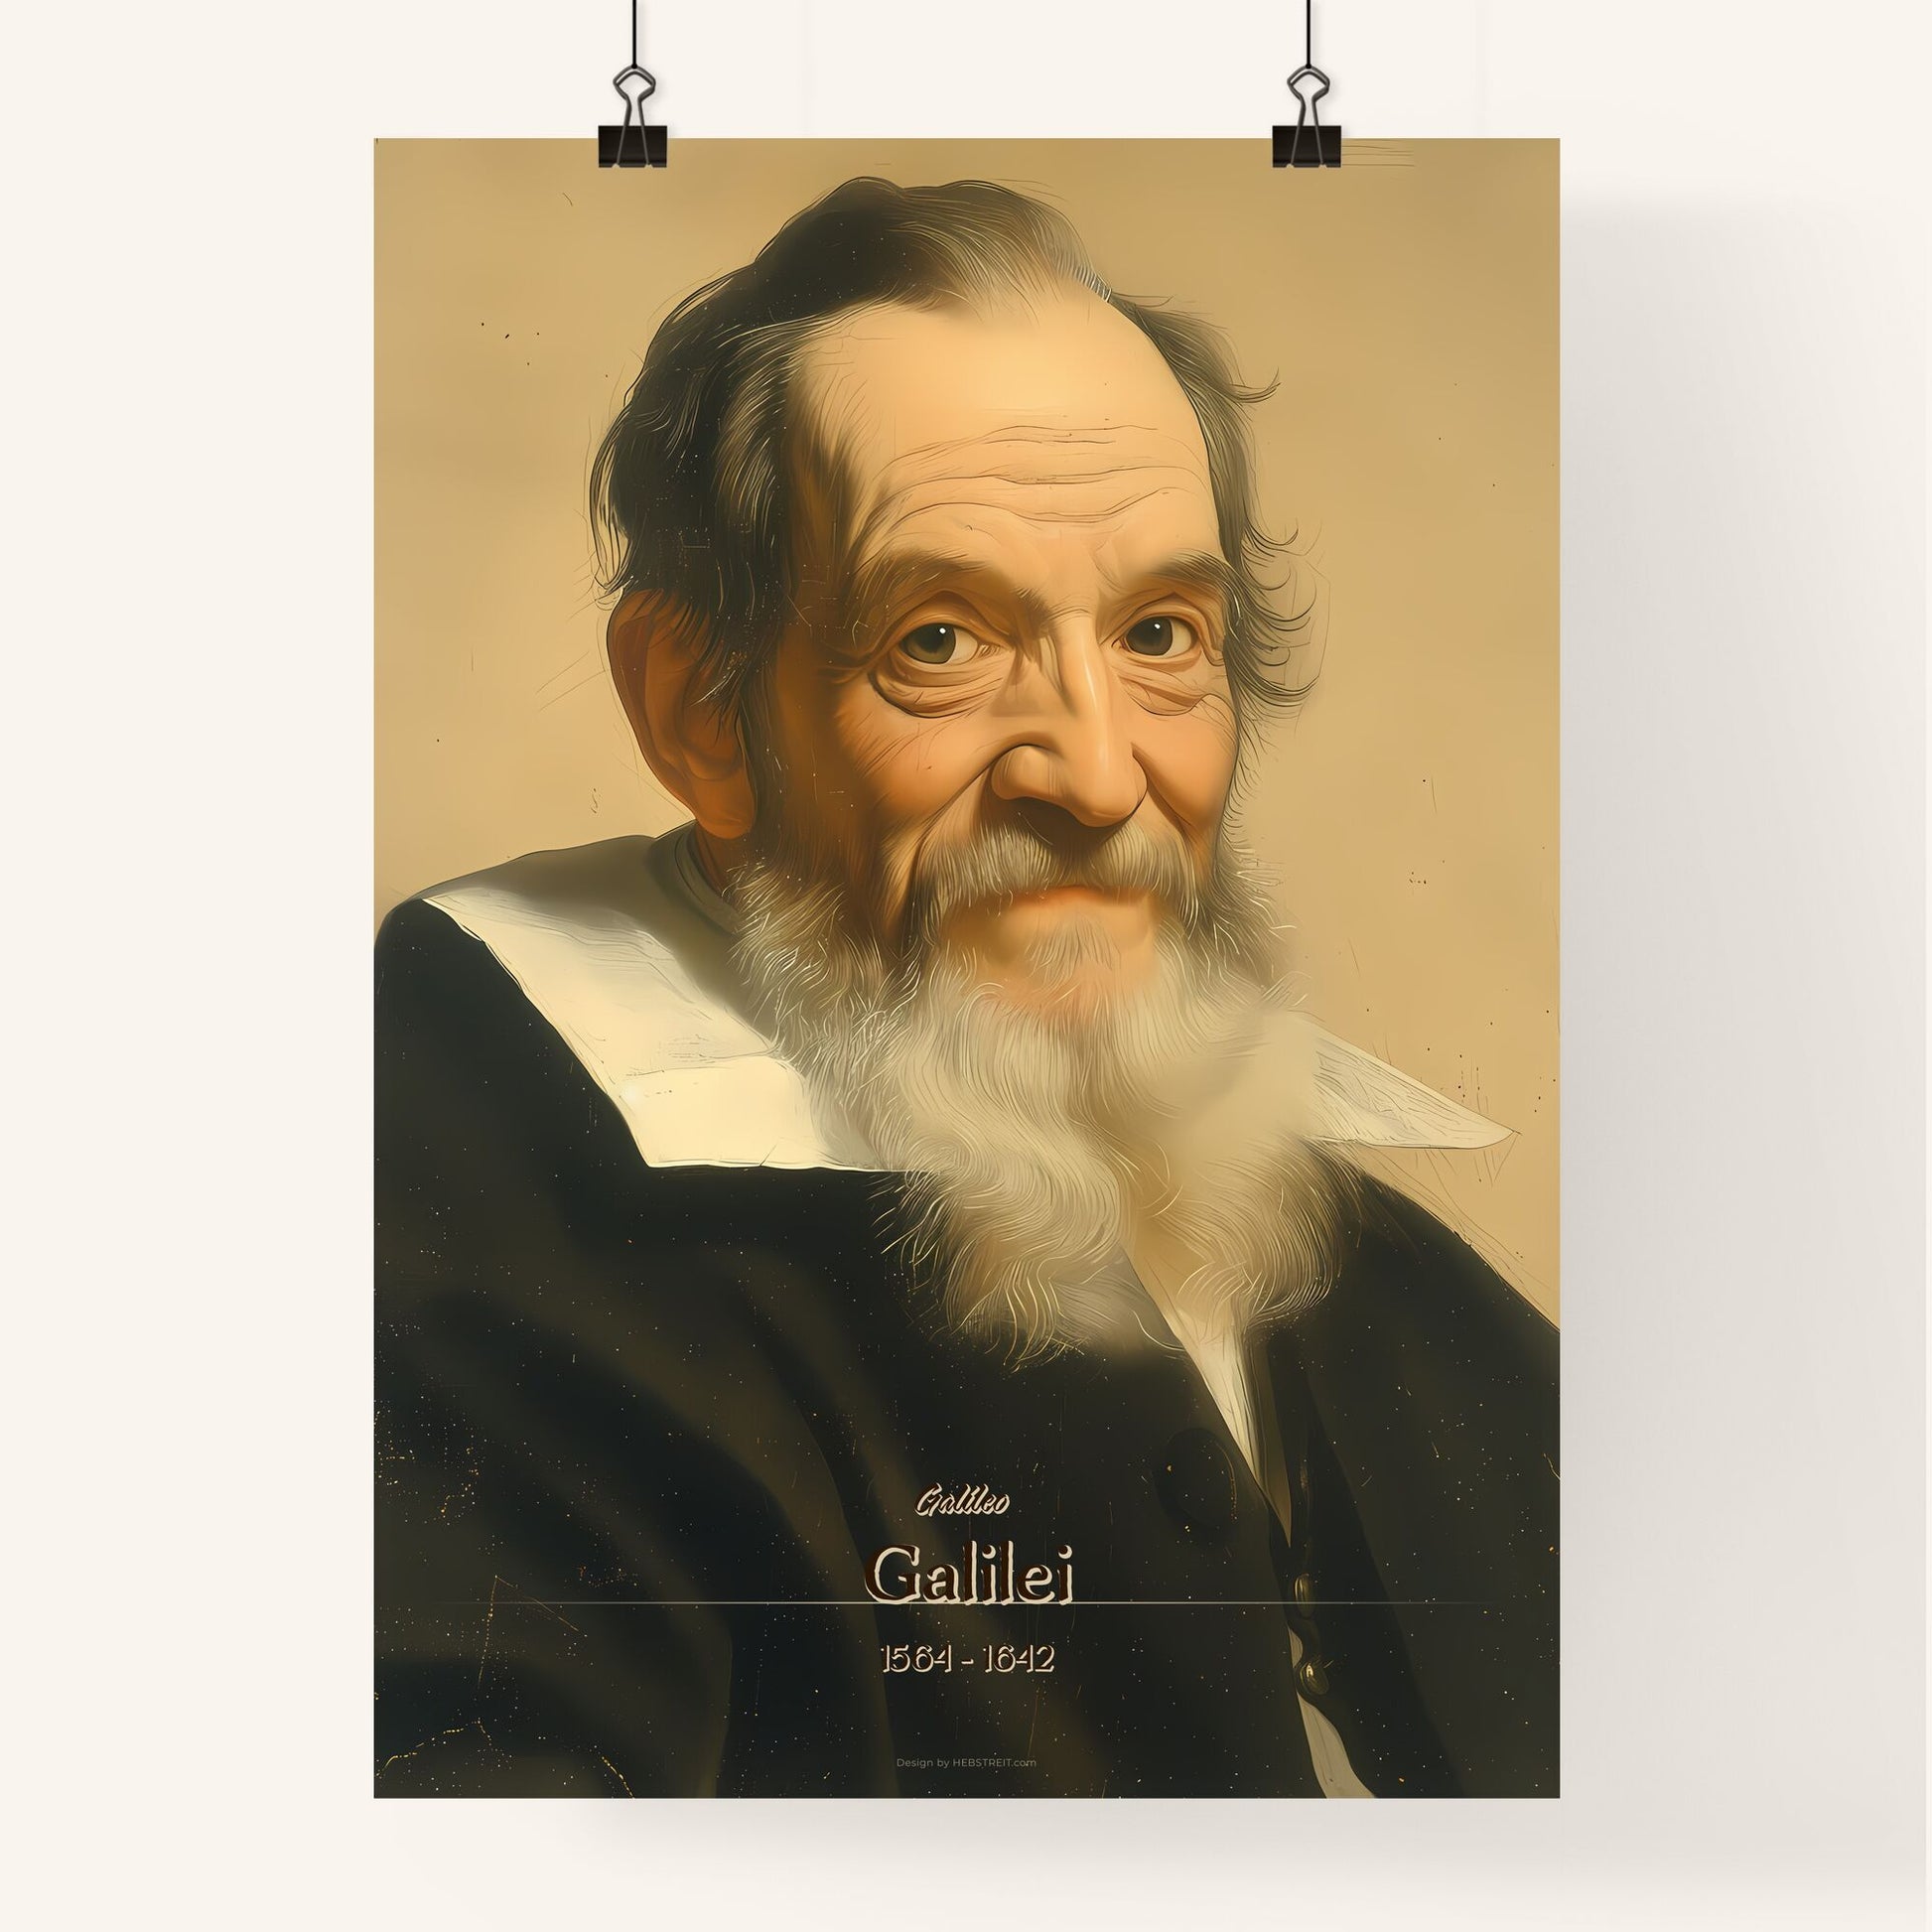 Galileo, Galilei, 1564 - 1642, A Poster of a man with a long beard Default Title